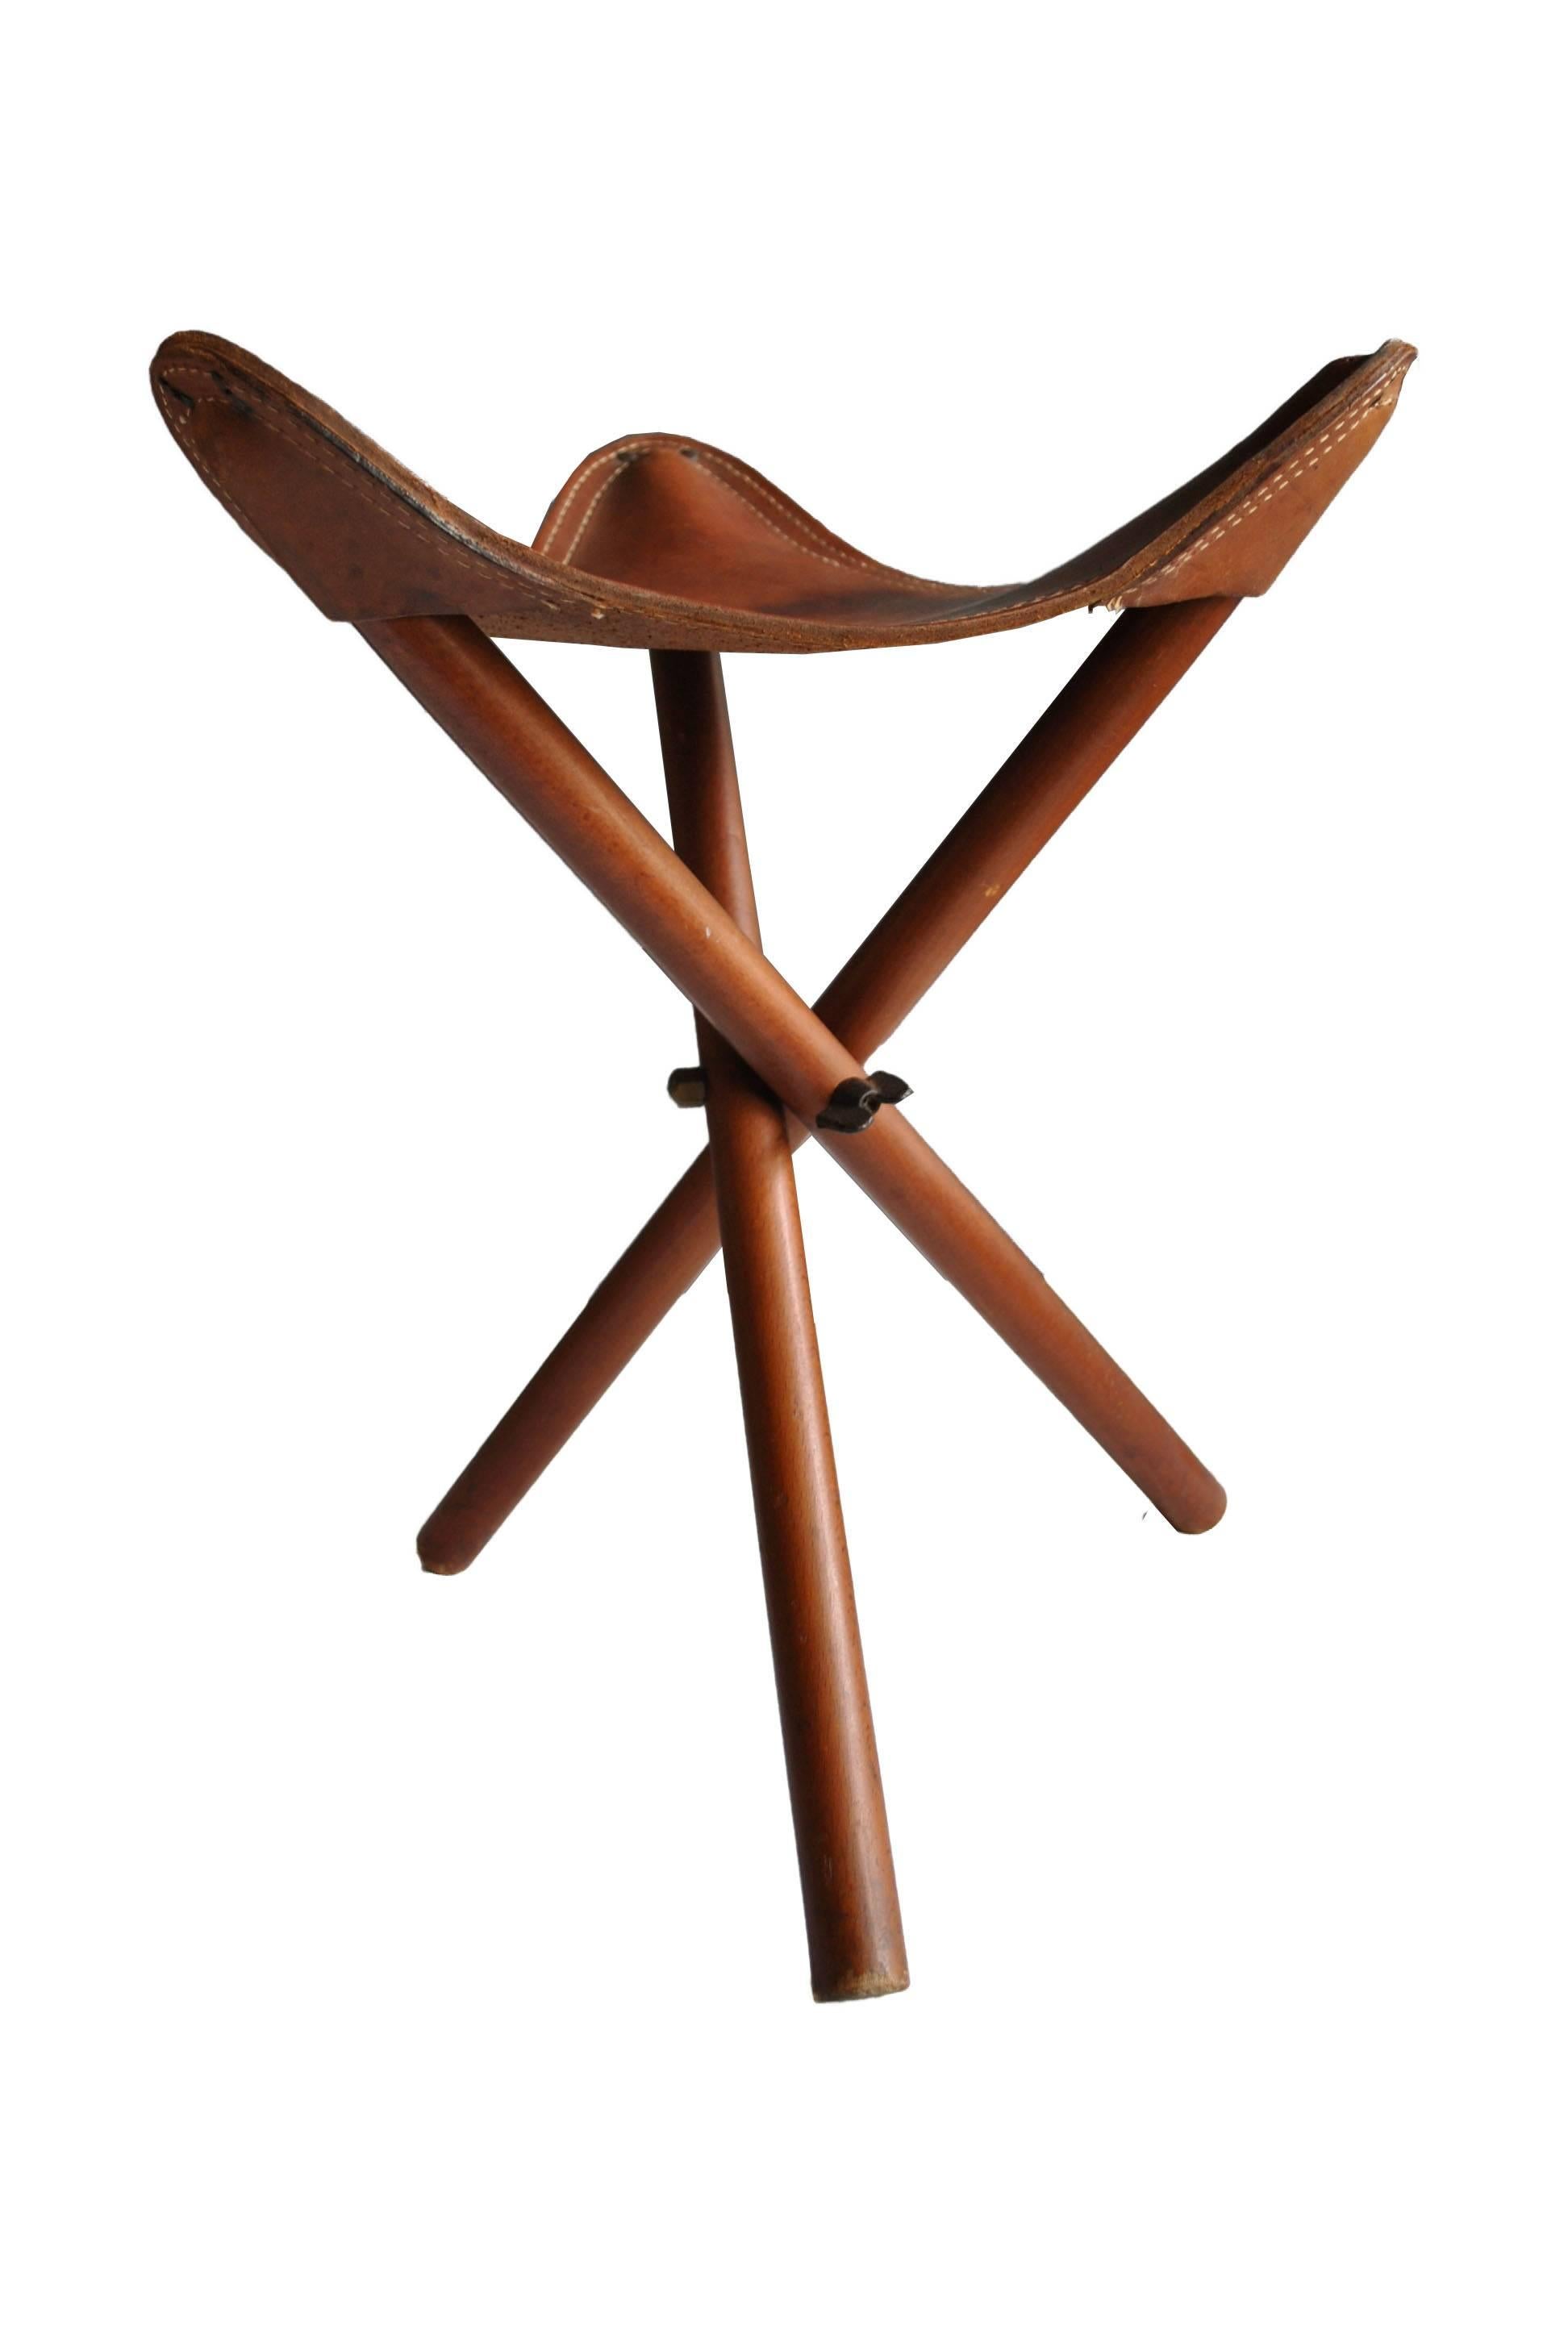 Folding tripod campaign stool. Thick saddle leather seat, early 20th century.